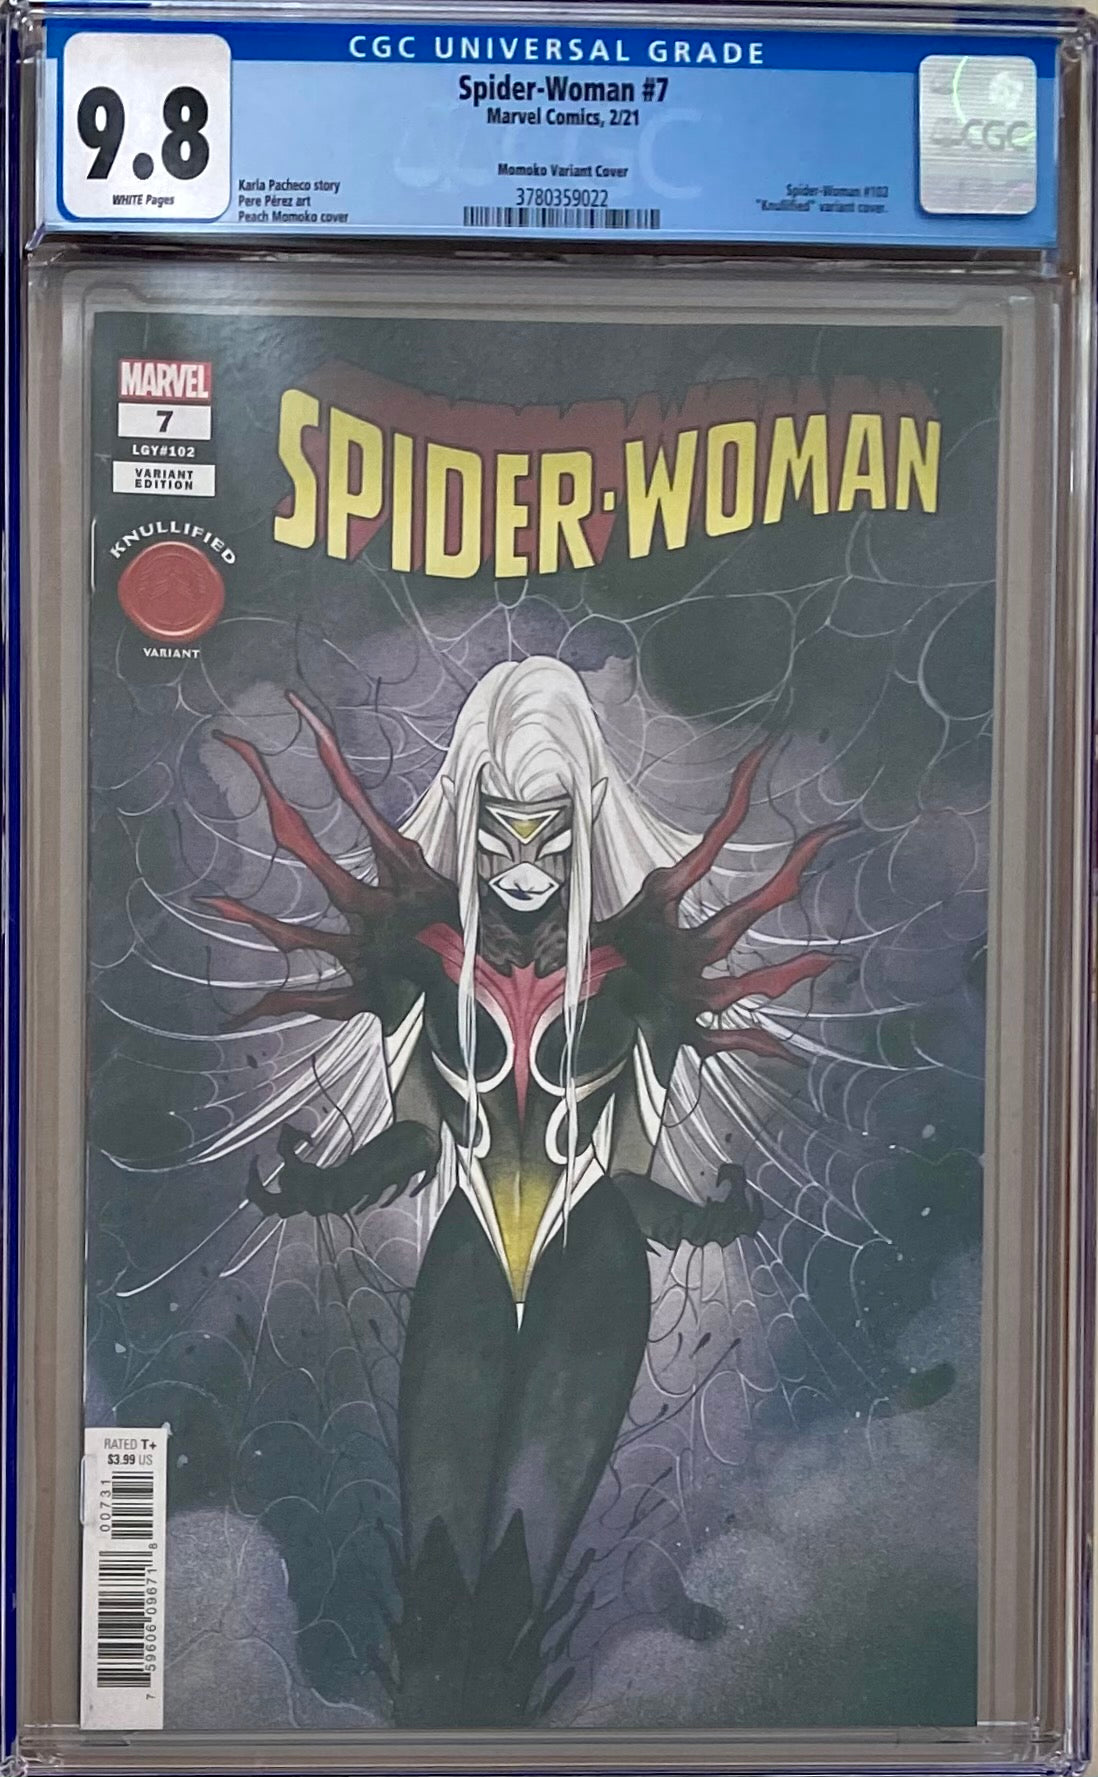 Spider-Woman #7 "Knullified" Variant CGC 9.8